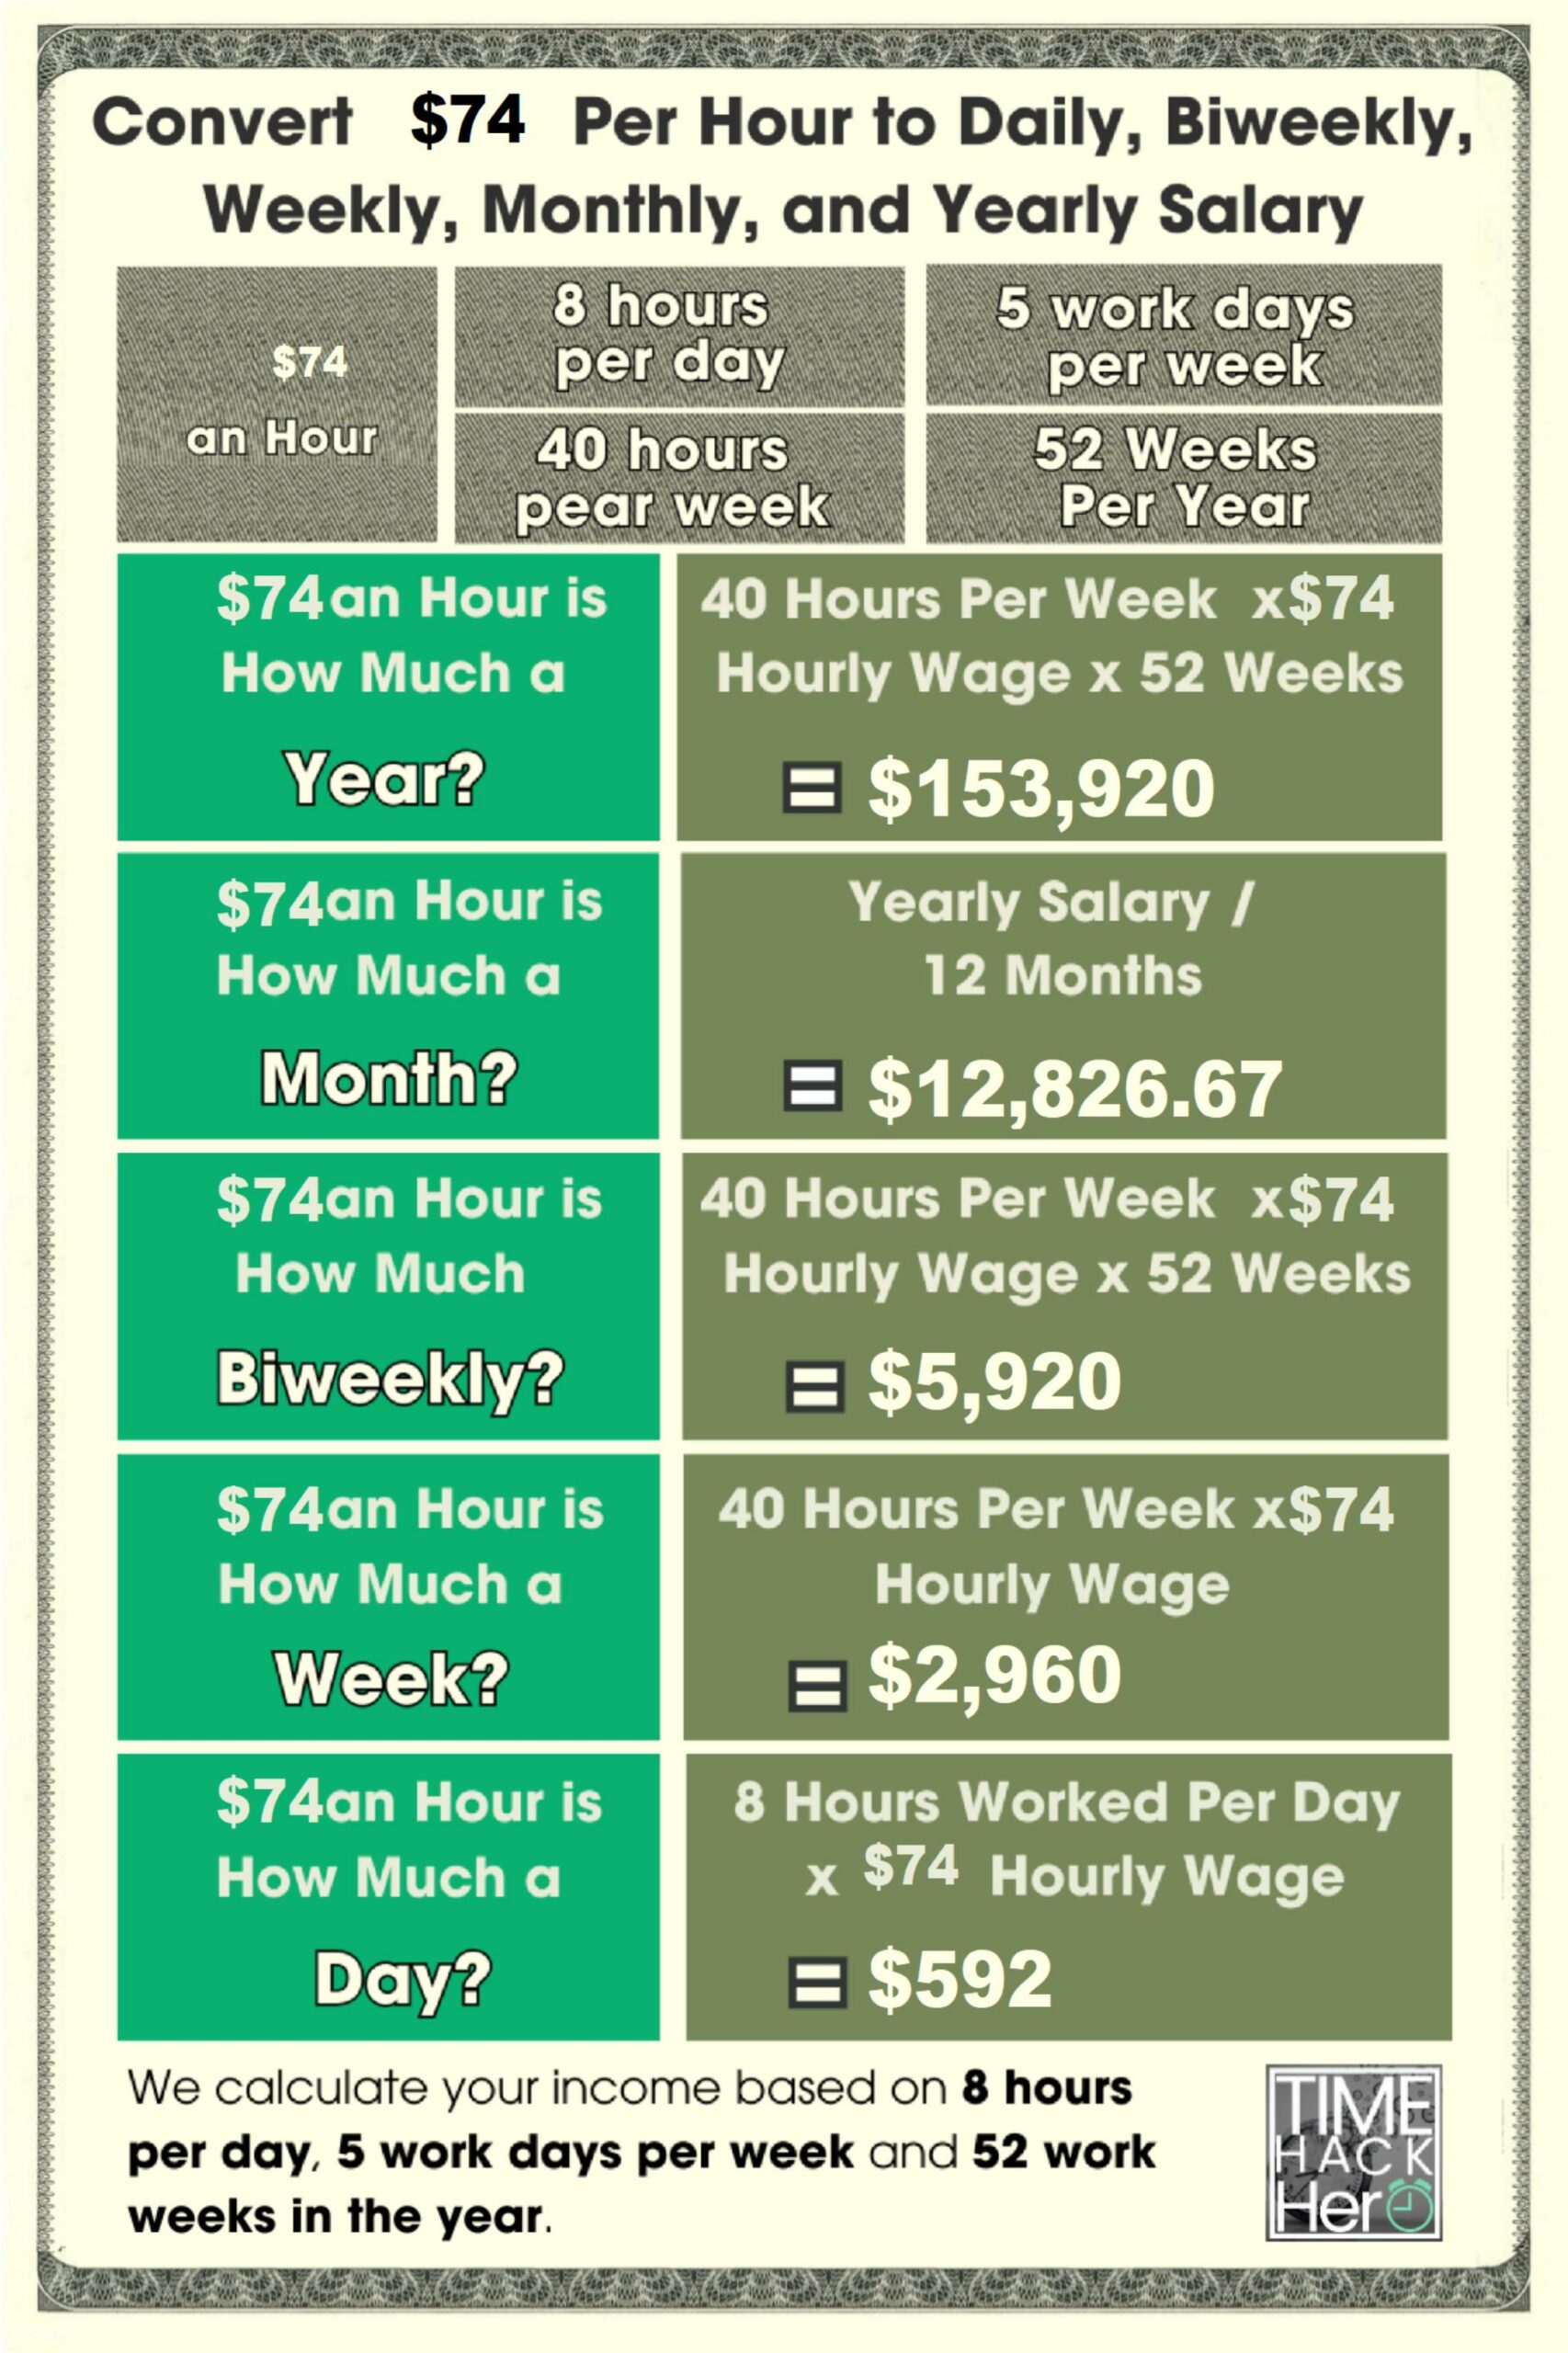 Convert $74 Per Hour to Weekly, Monthly, and Yearly Salary